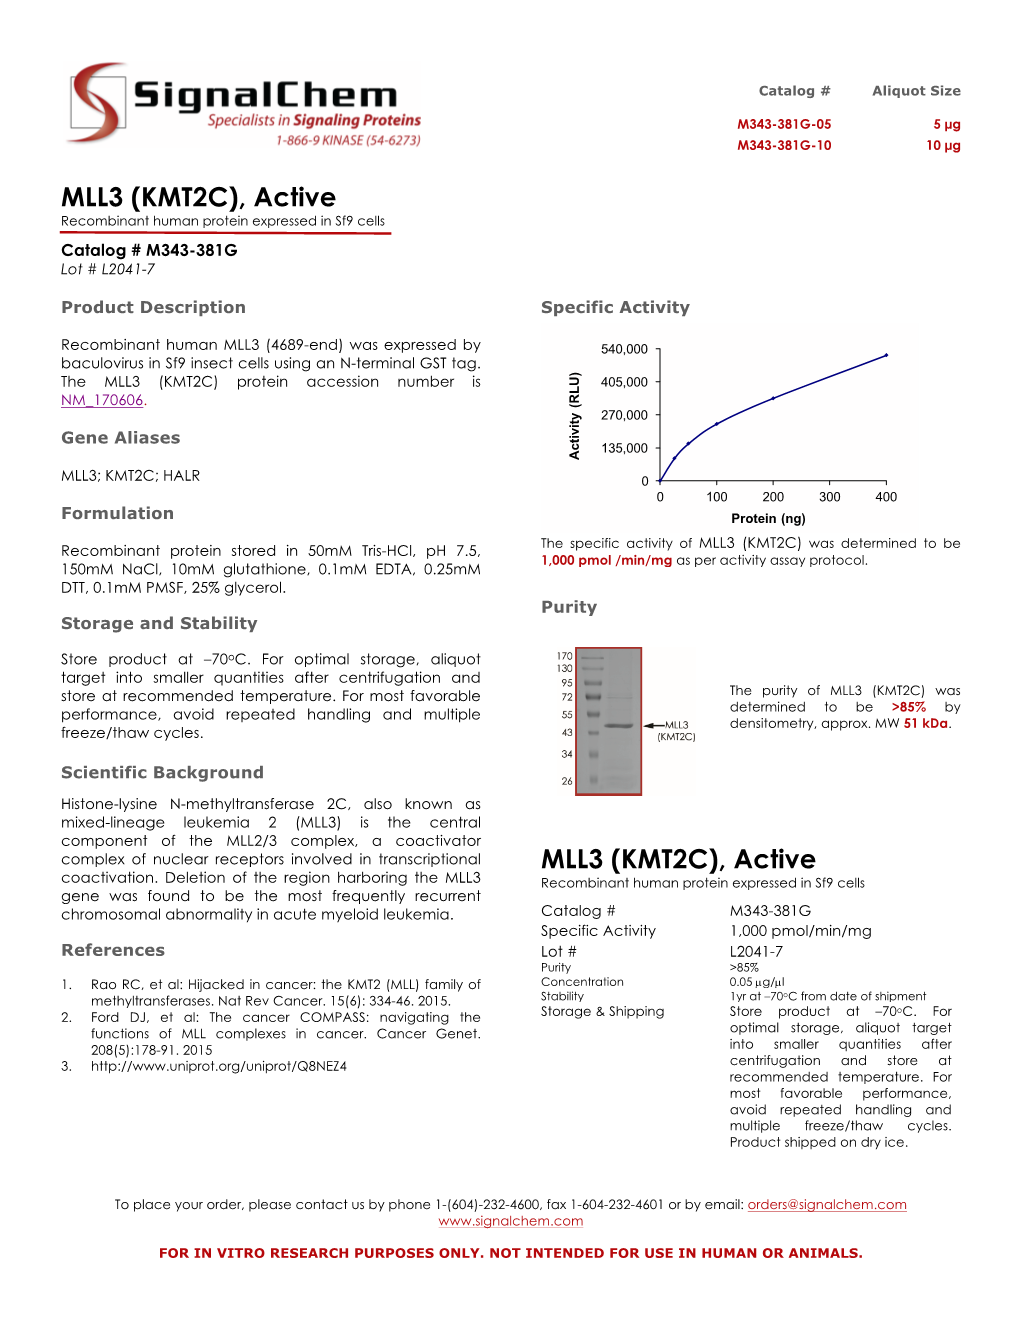 MLL3 (KMT2C), Active Recombinant Human Protein Expressed in Sf9 Cells